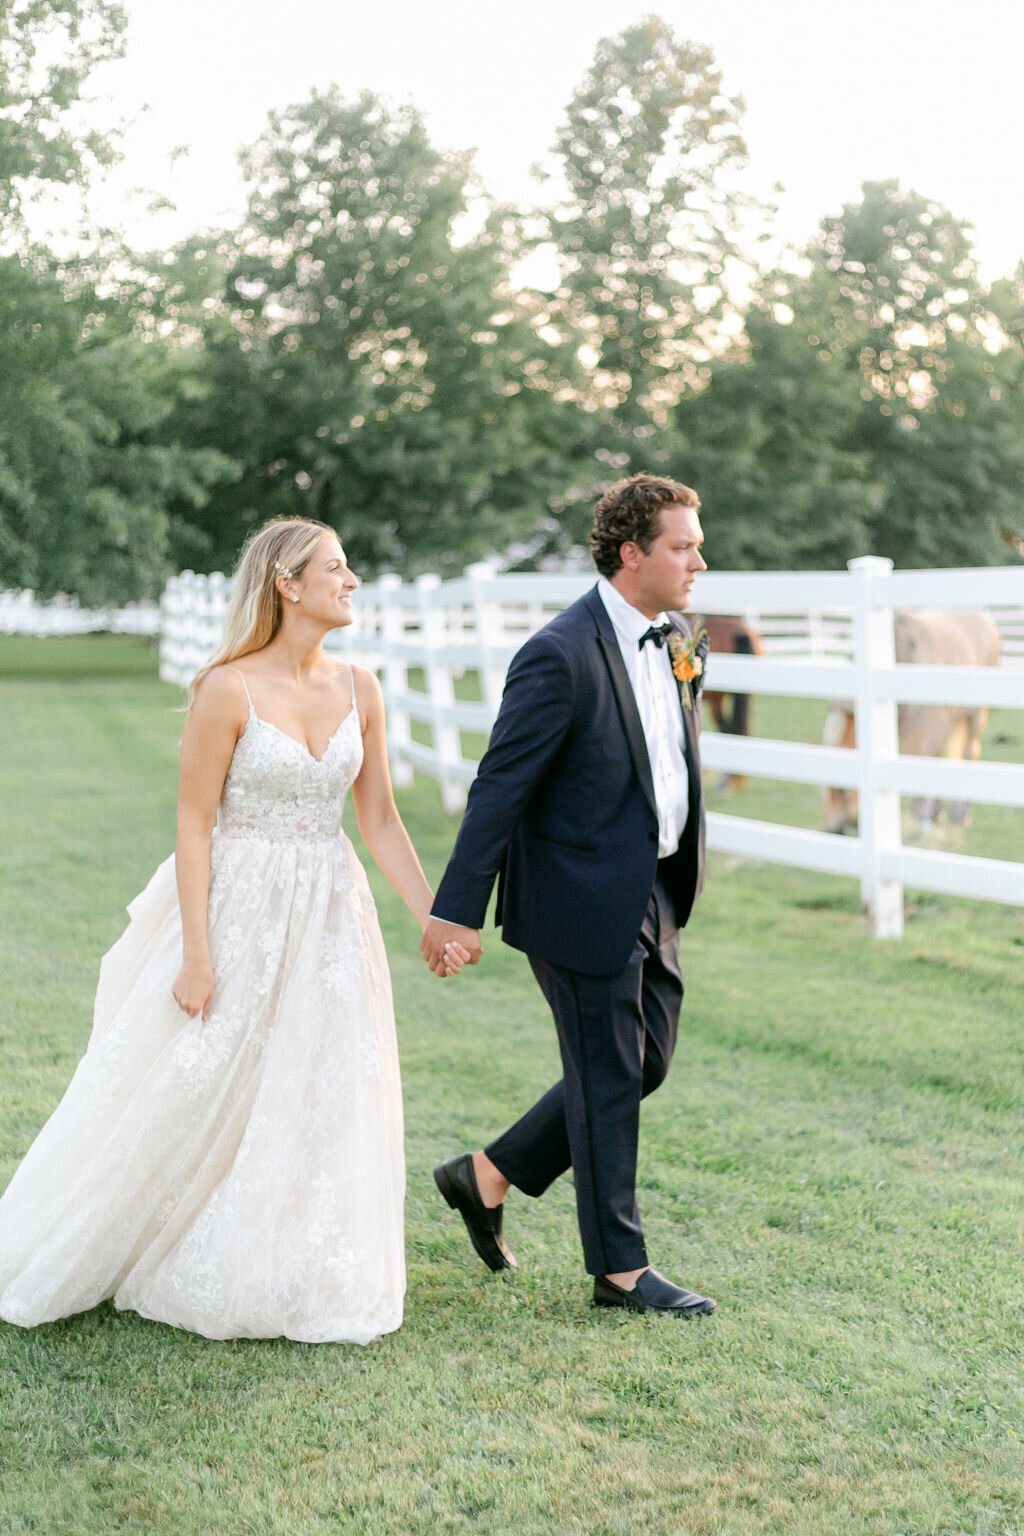 Rochester NY wedding photographer Emi Rose Studio at the Equicenter